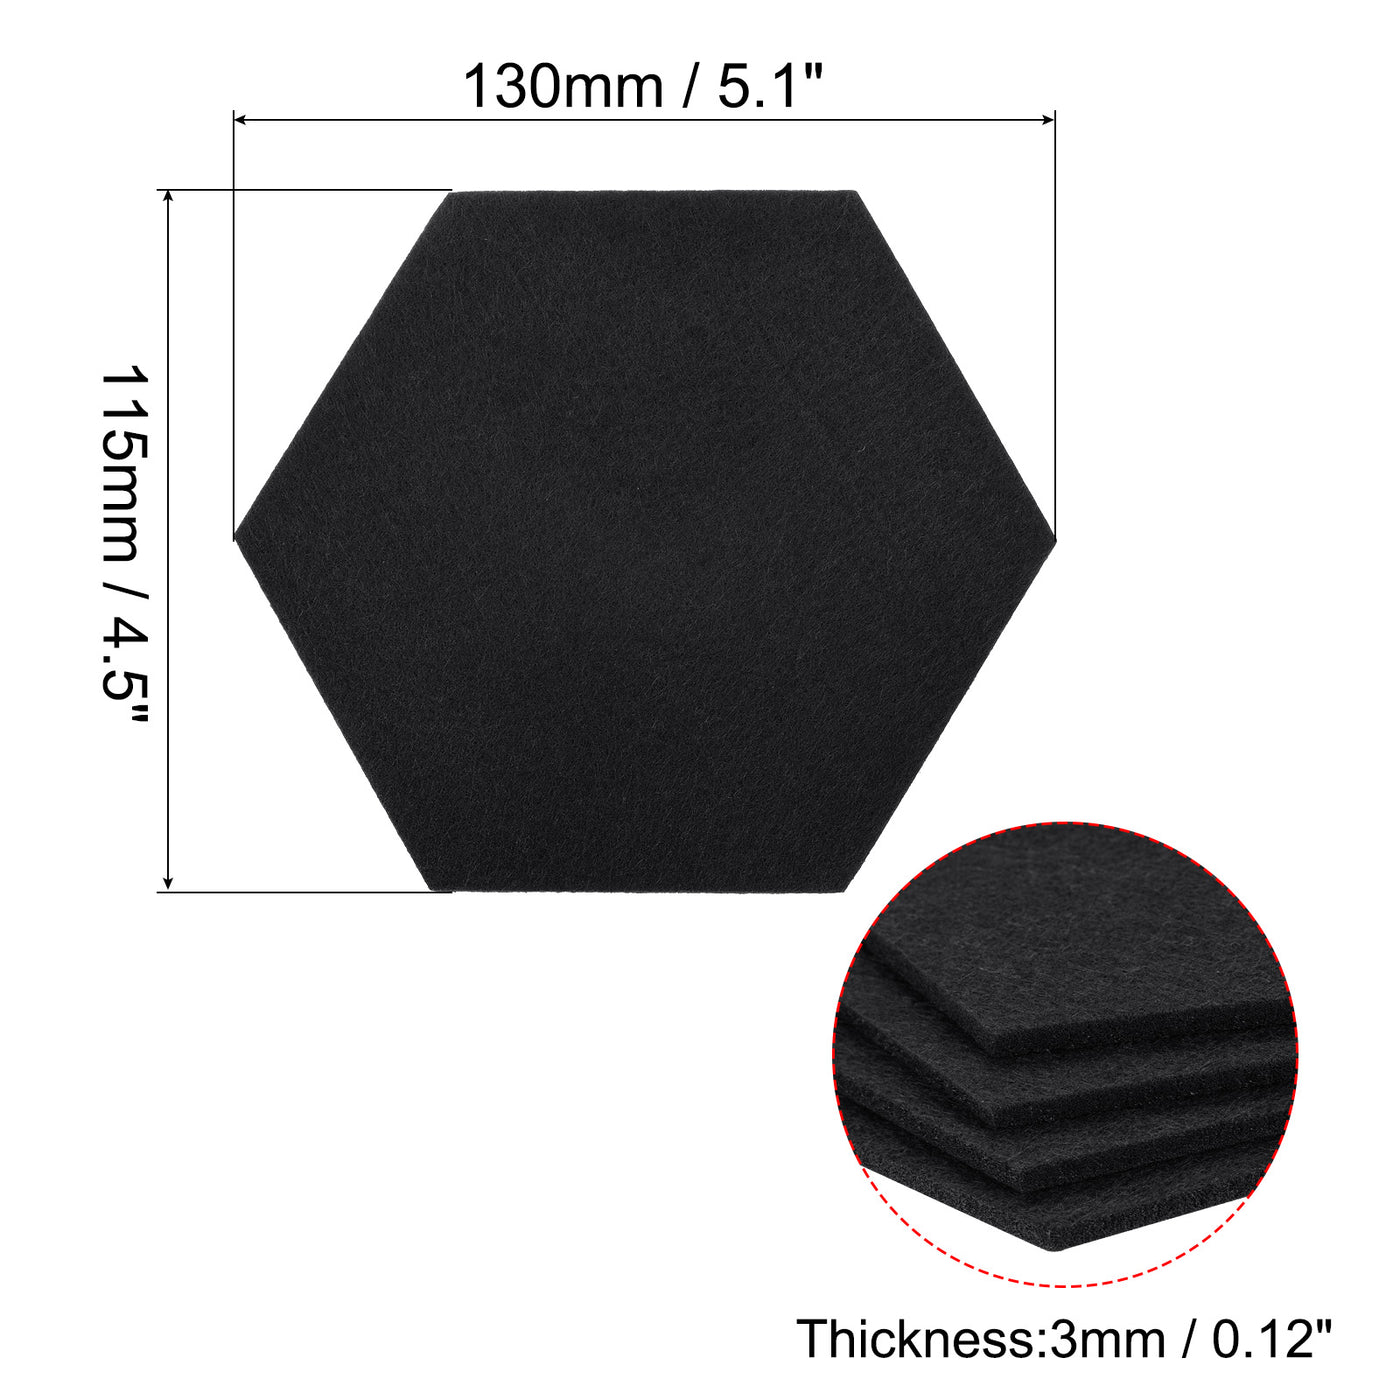 uxcell Uxcell Felt Coasters 9pcs Absorbent Pad Coaster for Drink Cup Pot Bowl Vase Black